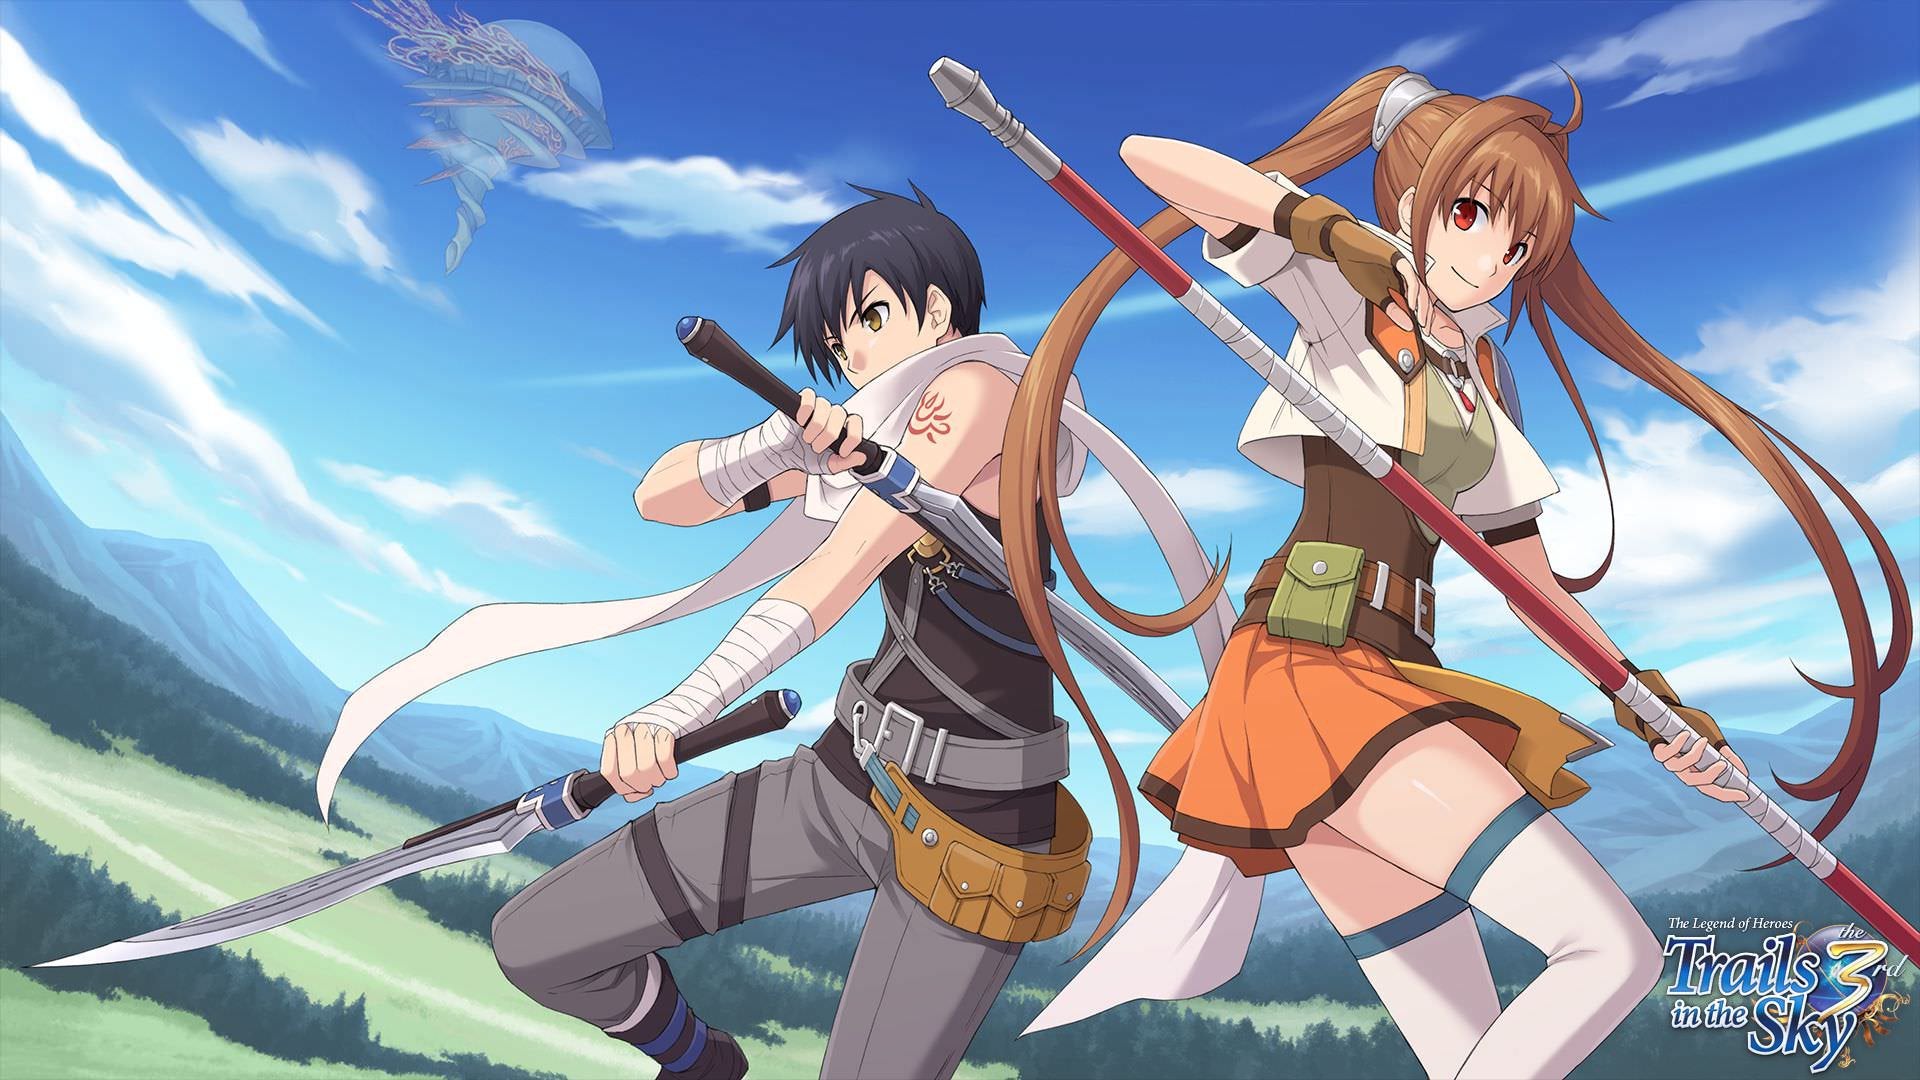 Trails Wallpaper collection (Images): Falcom